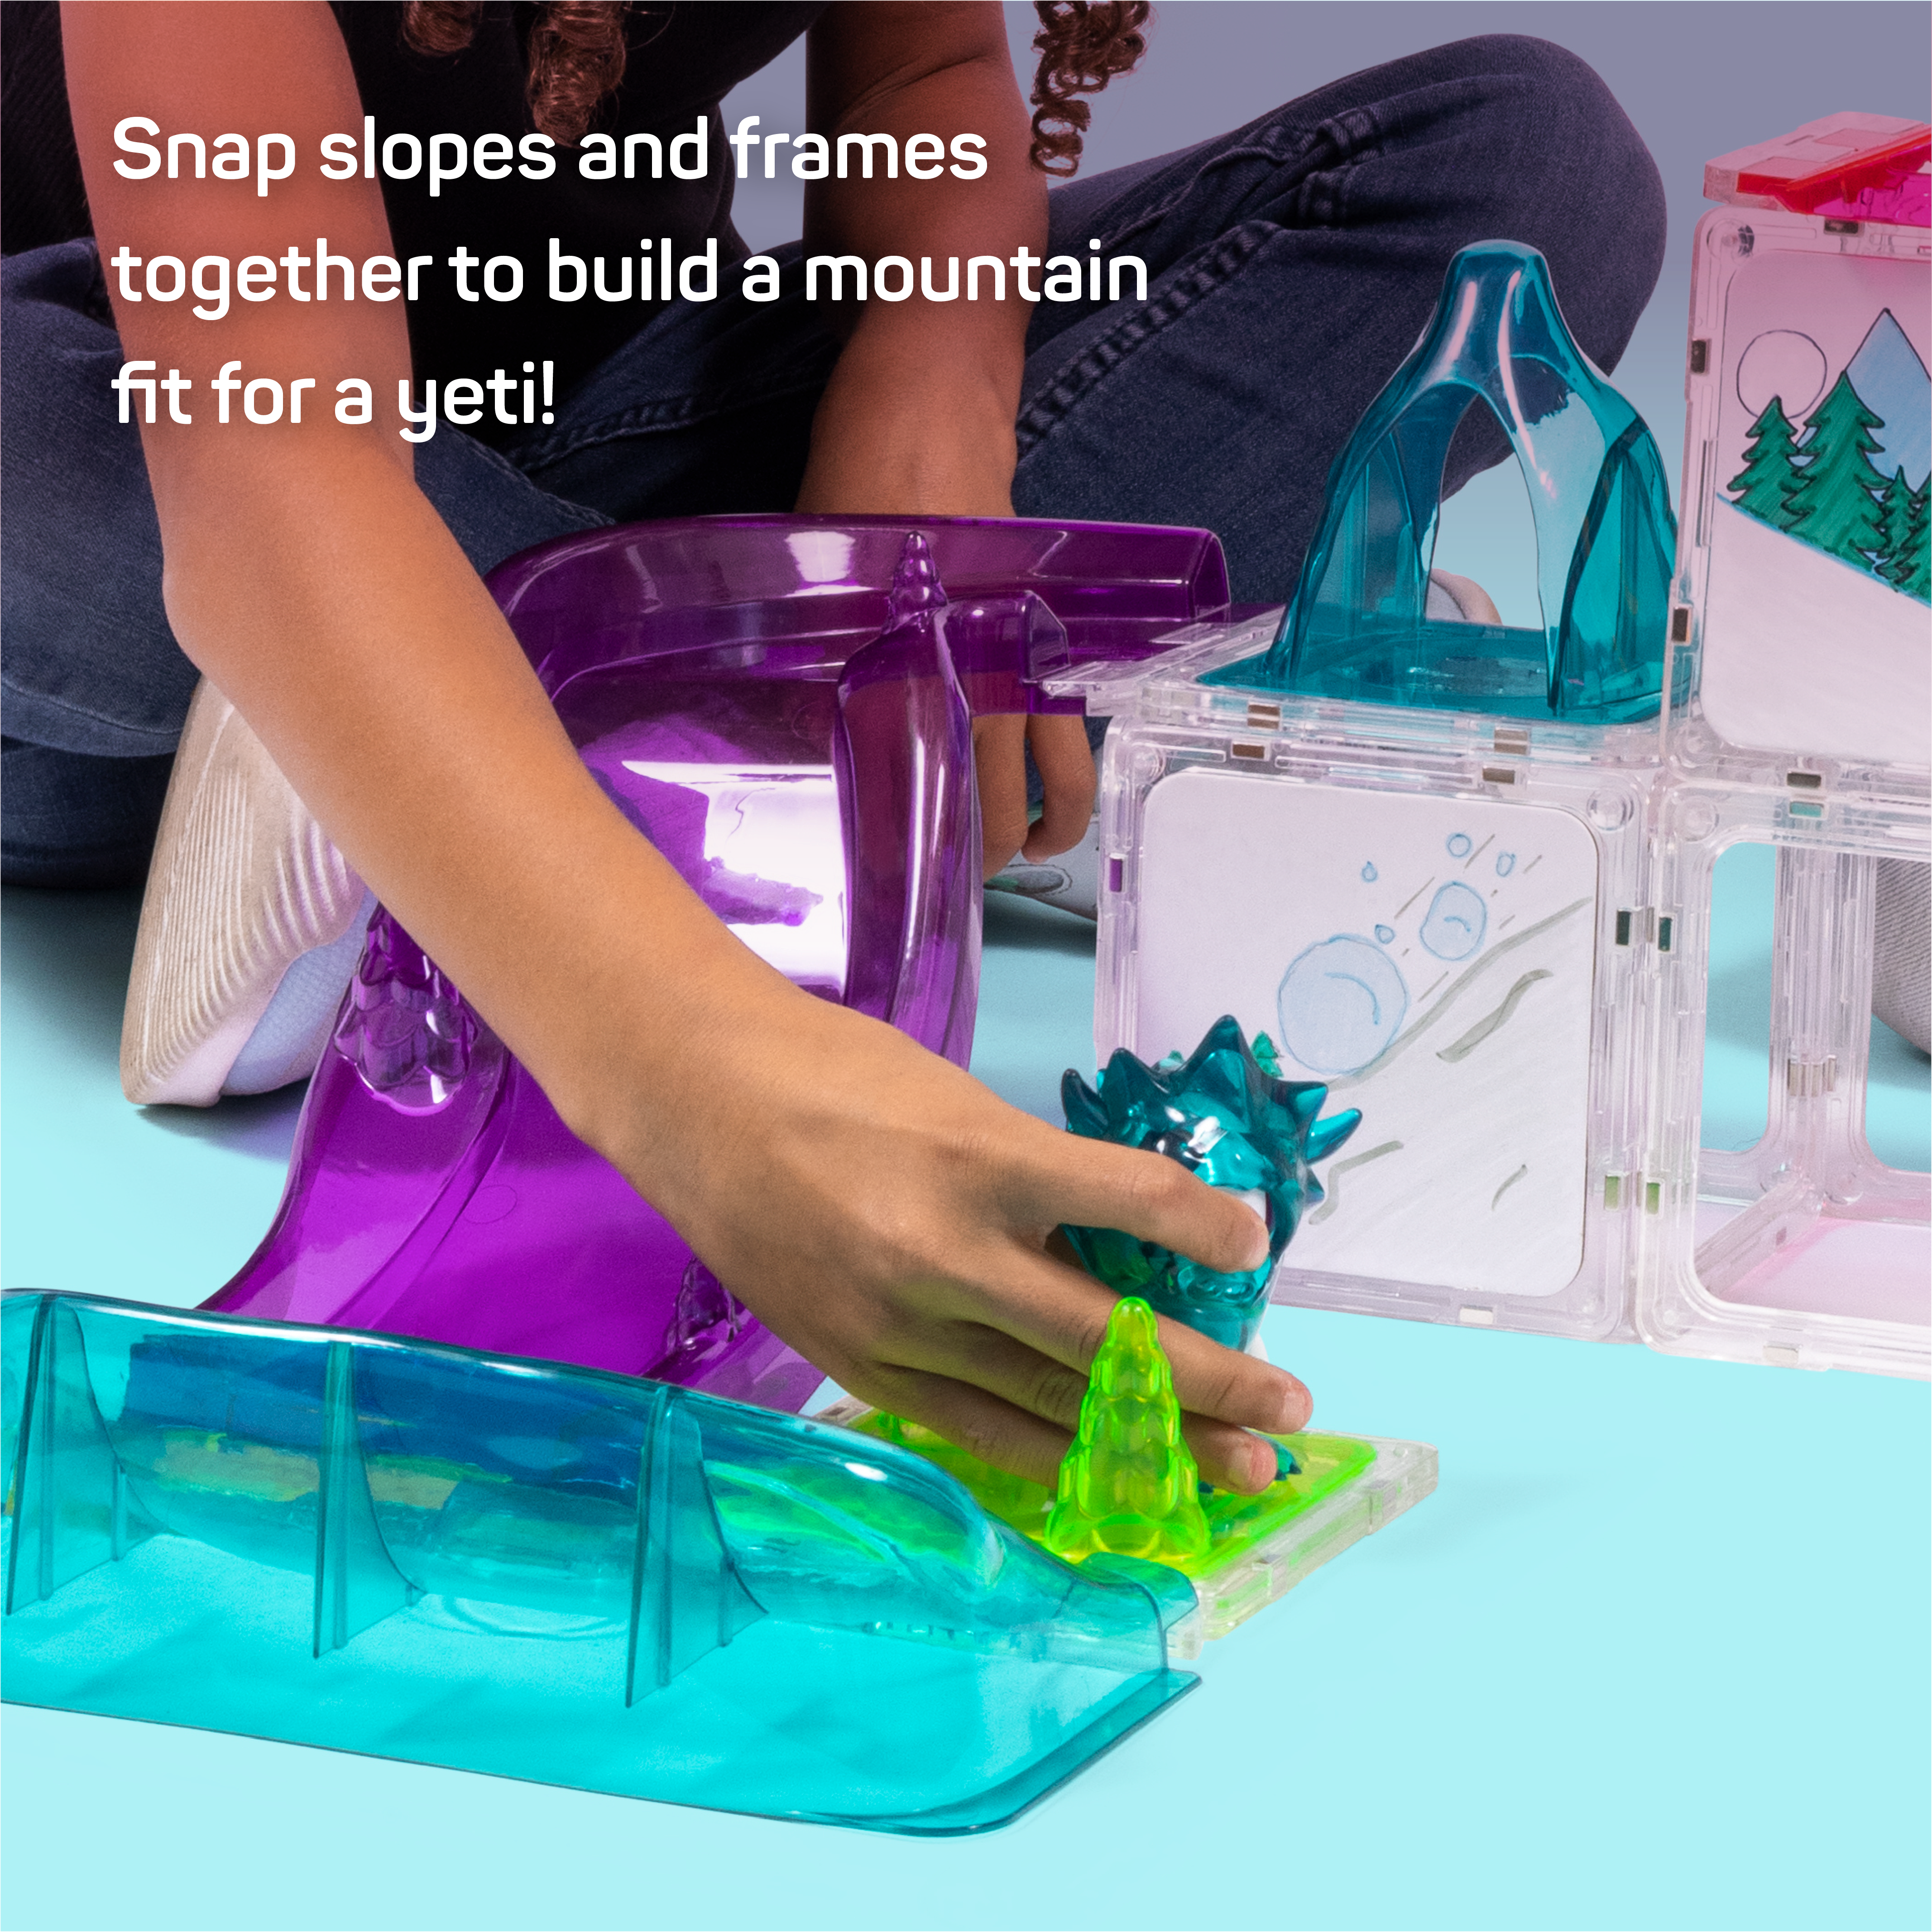 Kid playing with yeti character on Yeti Yikes build with text that reads "Snap slopes and frames together to build a mountain fit for a yeti!"